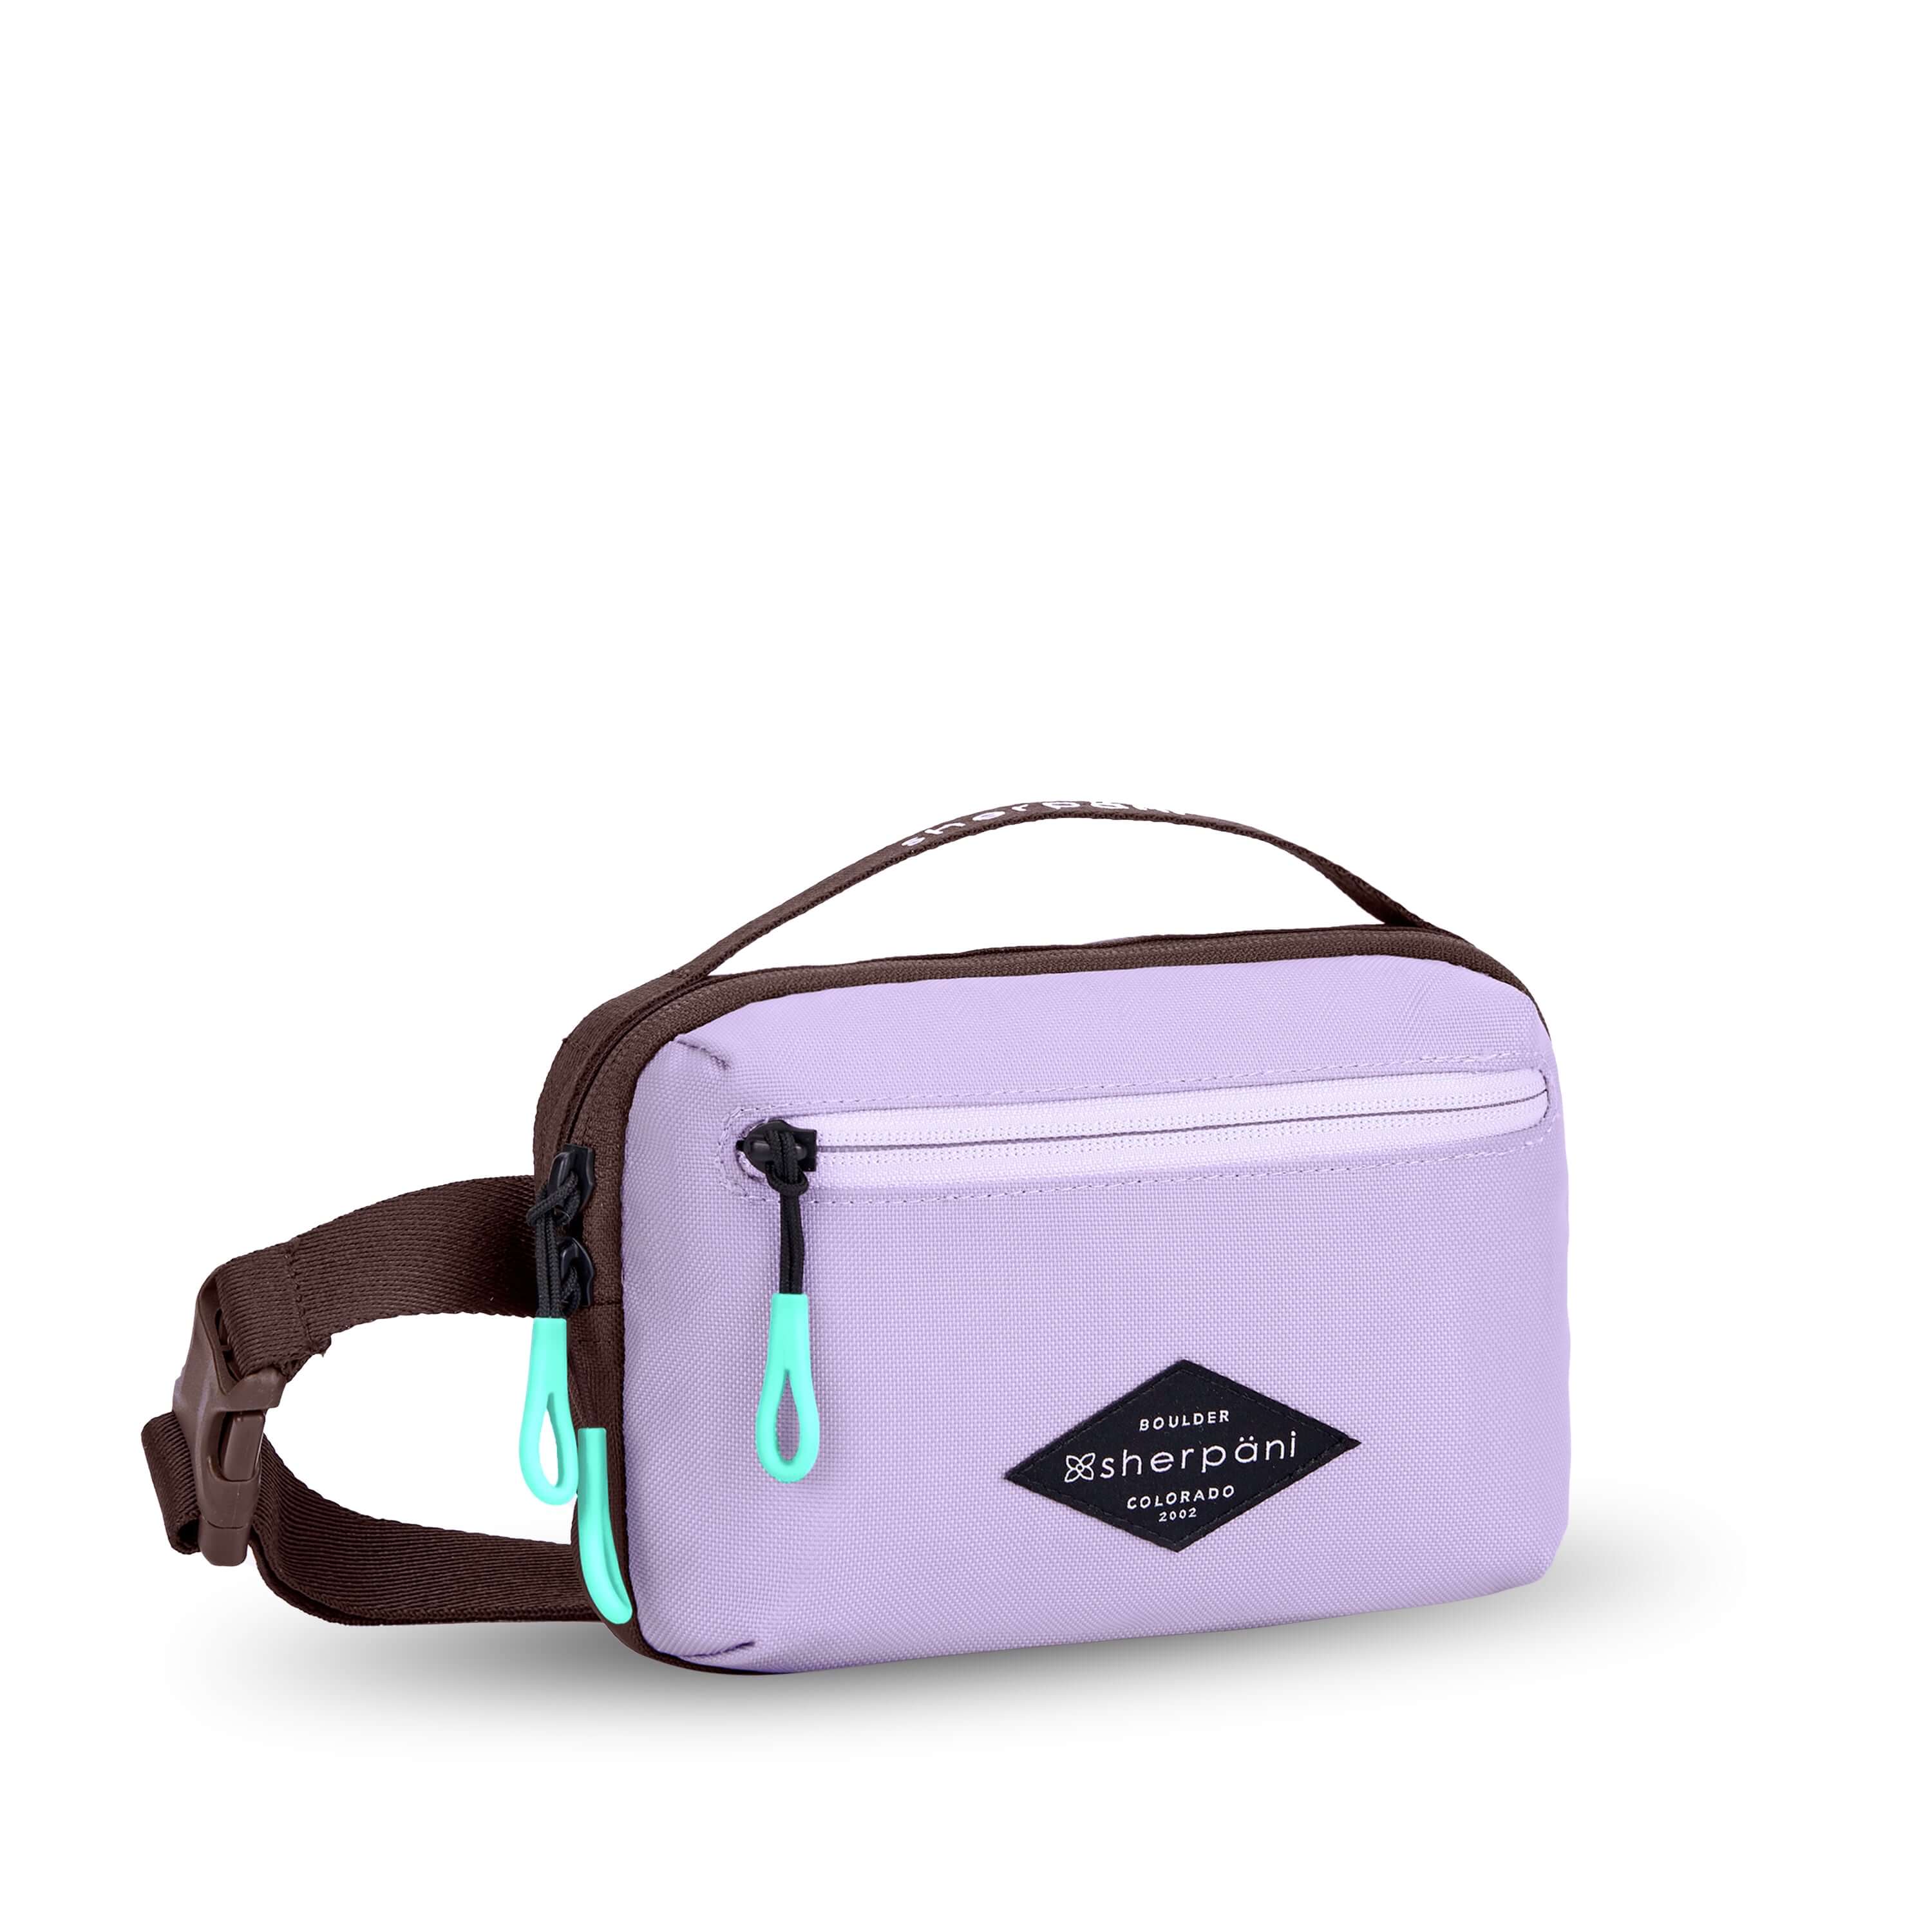 Angled front view of Sherpani’s fanny pack, the Hyk in Lavender. The bag is two-toned, the front half is lavender and the back half is brown. There is an external zipper pocket on the front of the bag. Easy-pull zippers are accented in aqua. The fanny pack features an adjustable strap with a buckle. #color_lavender